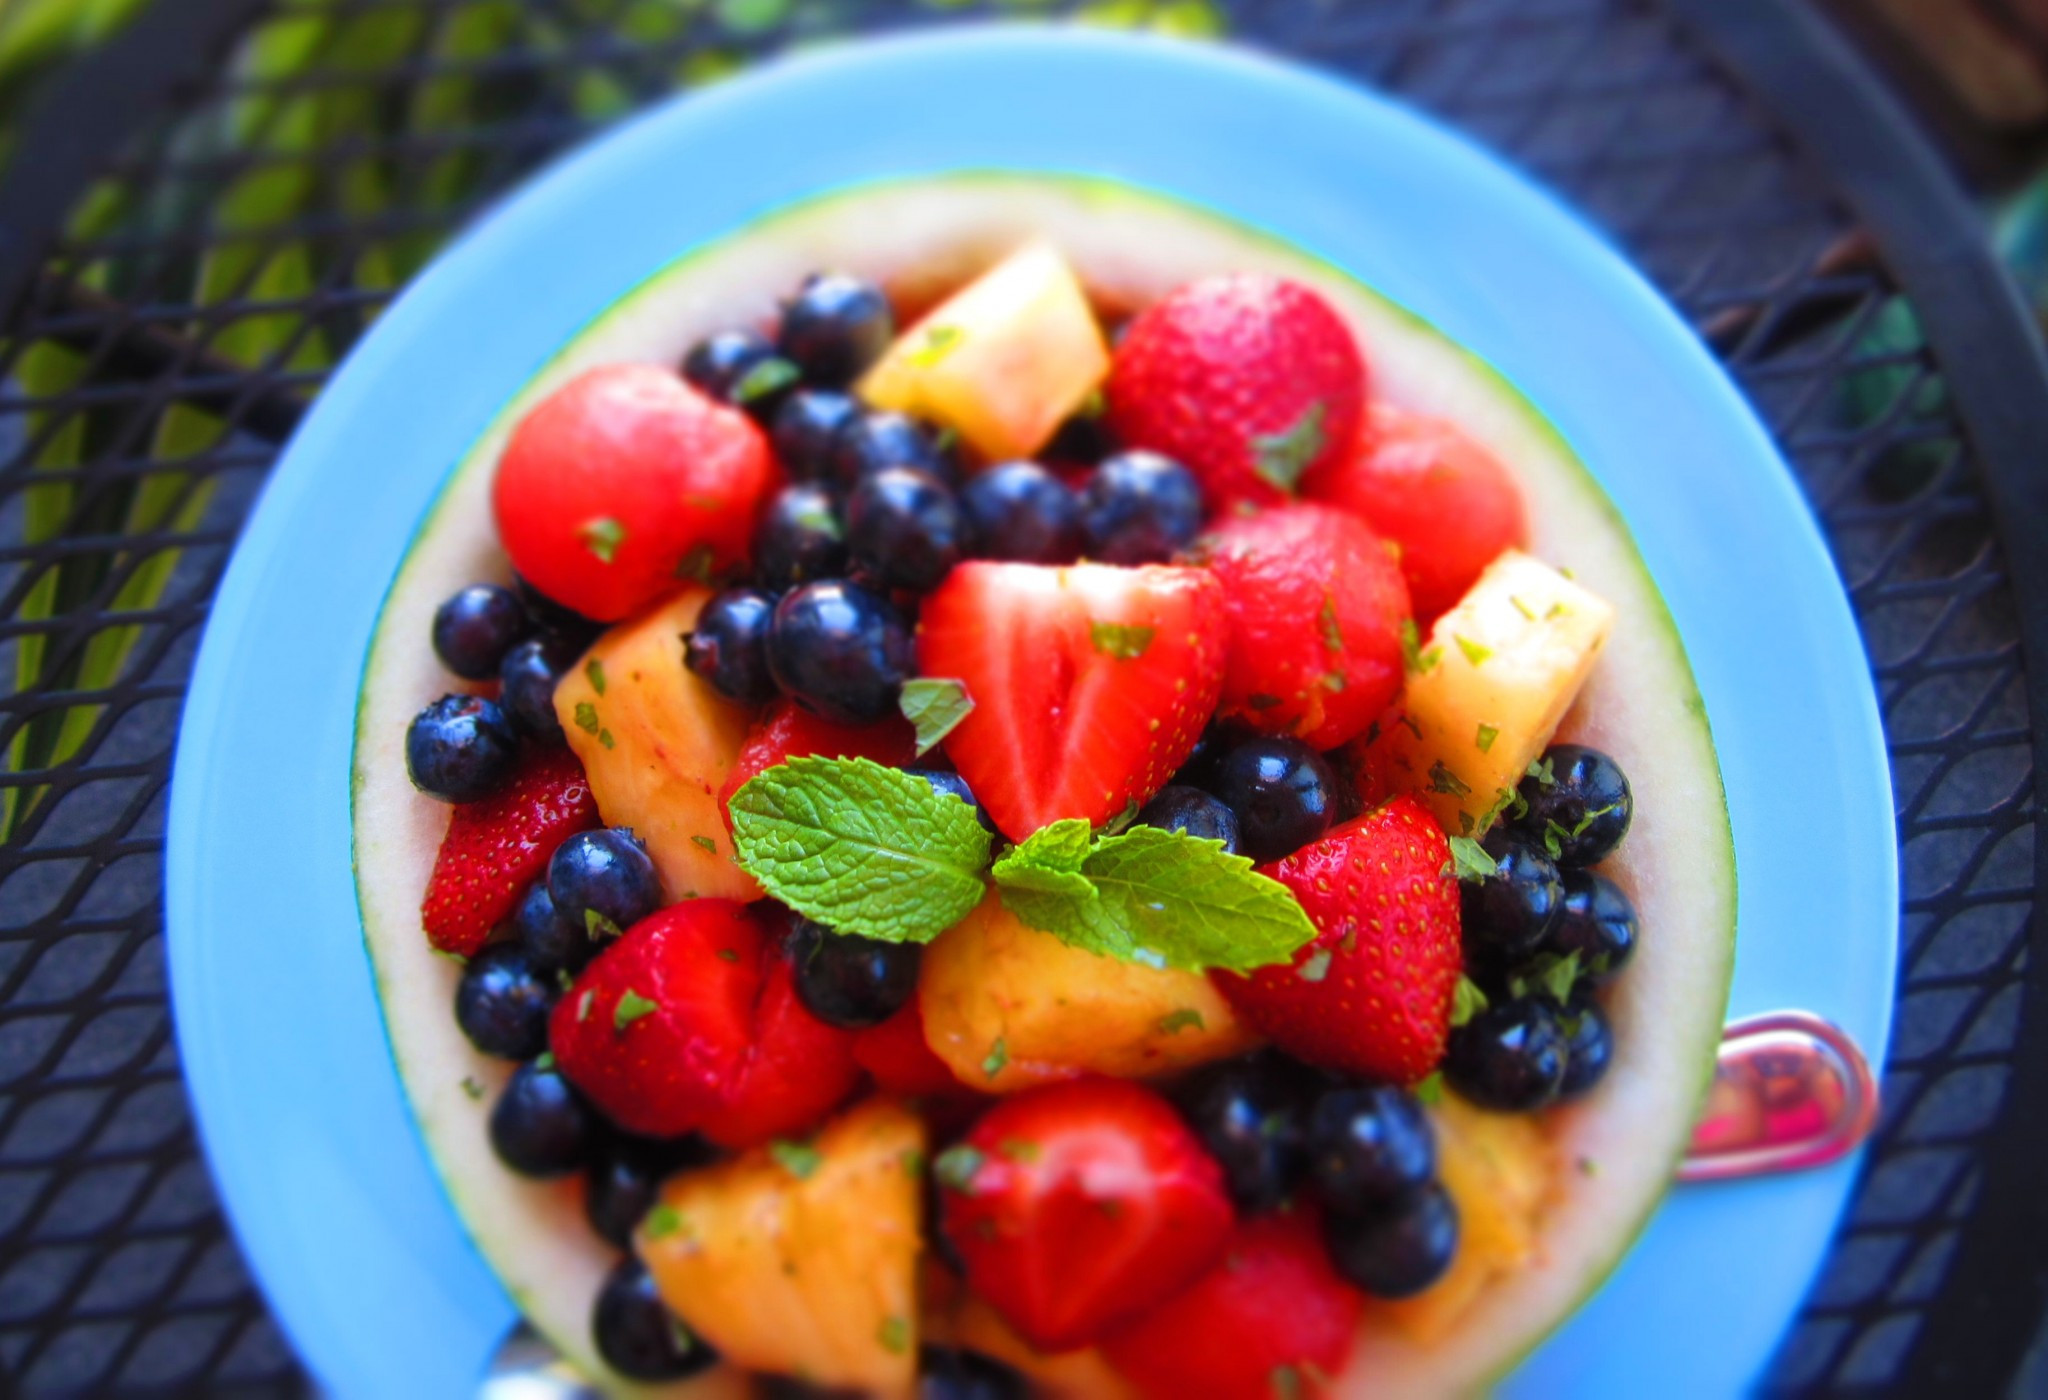 Healthy Fresh Fruit Desserts
 10 Healthy but Delicious Desserts You Should Try